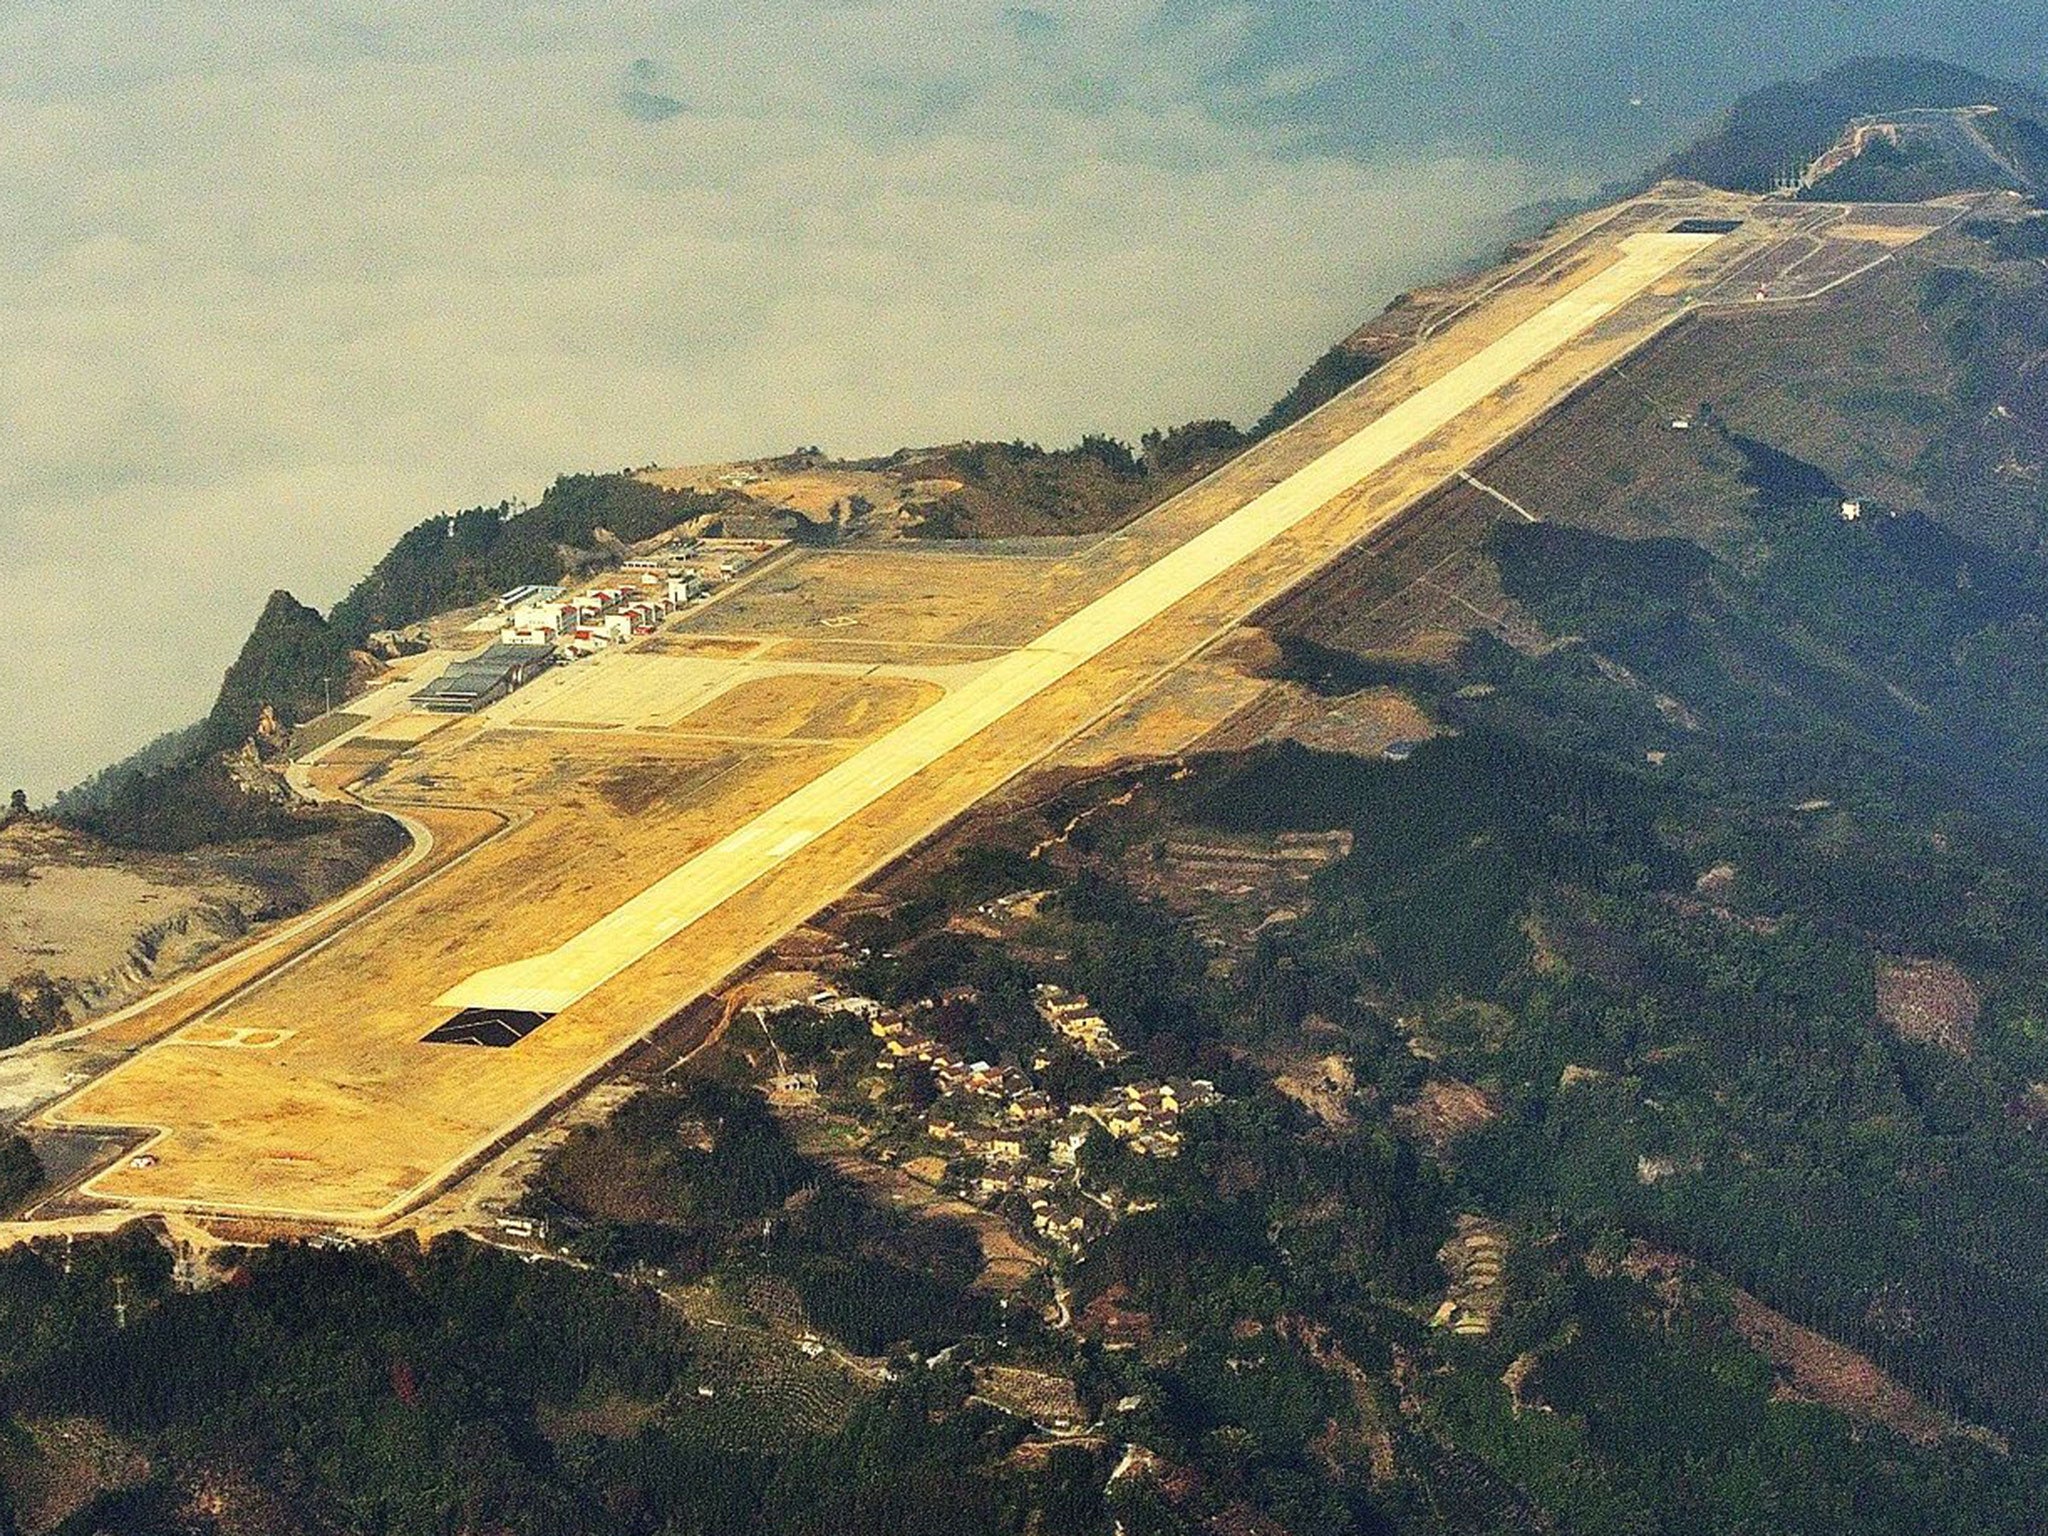 A view of the runway of the new airport built on top of mountains in Hechi city